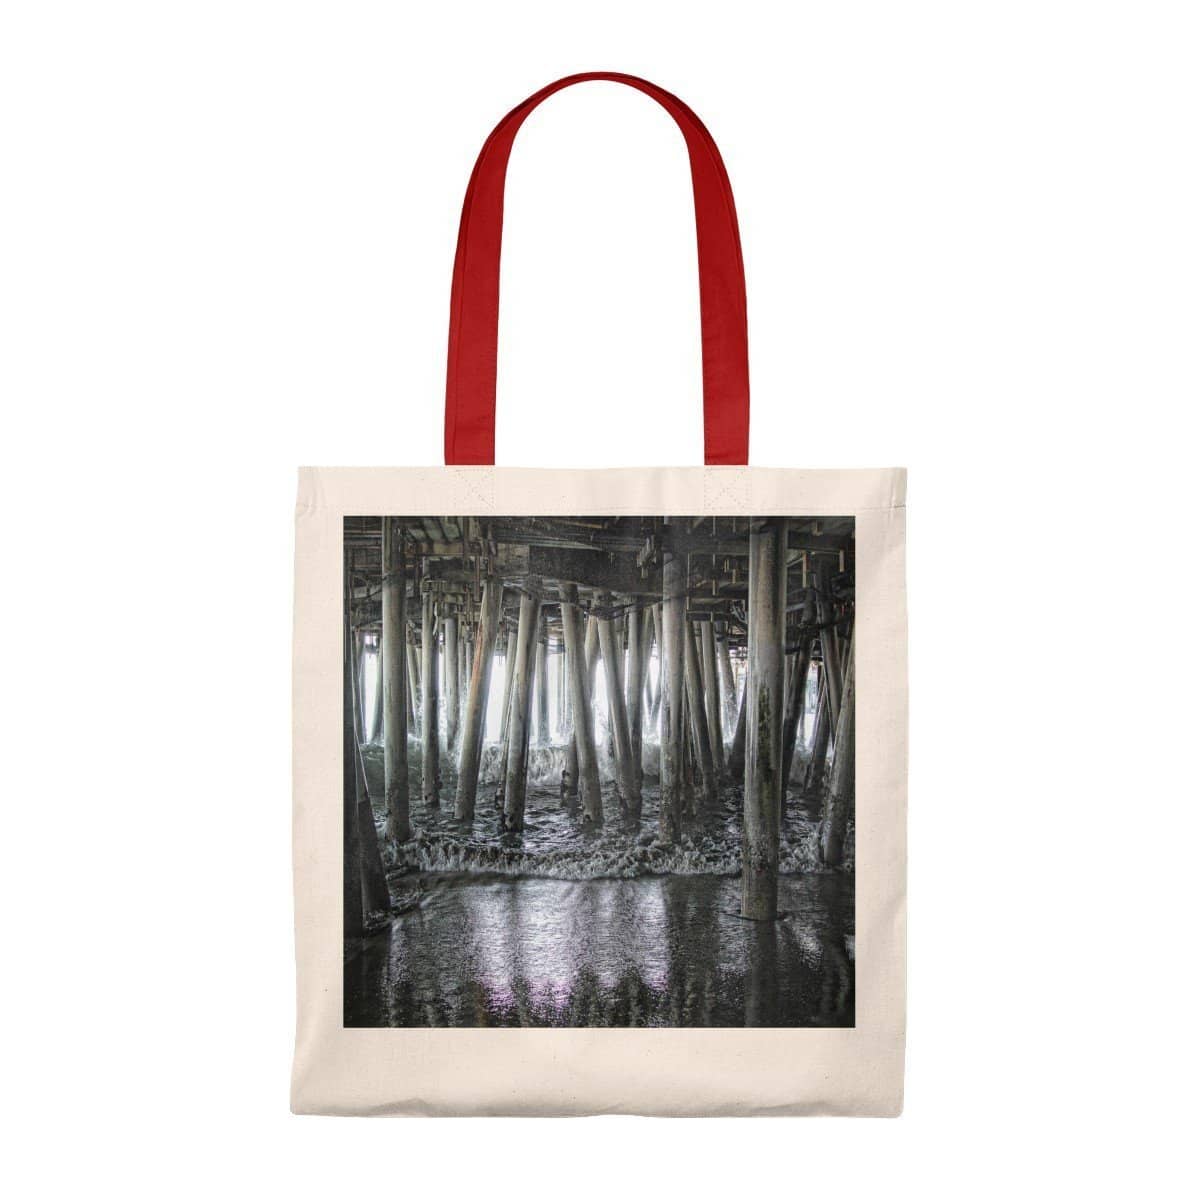 Tote Bag - Vintage Under the Pier (5 Colors) Natural/Red / Small Bags (2854226231396)